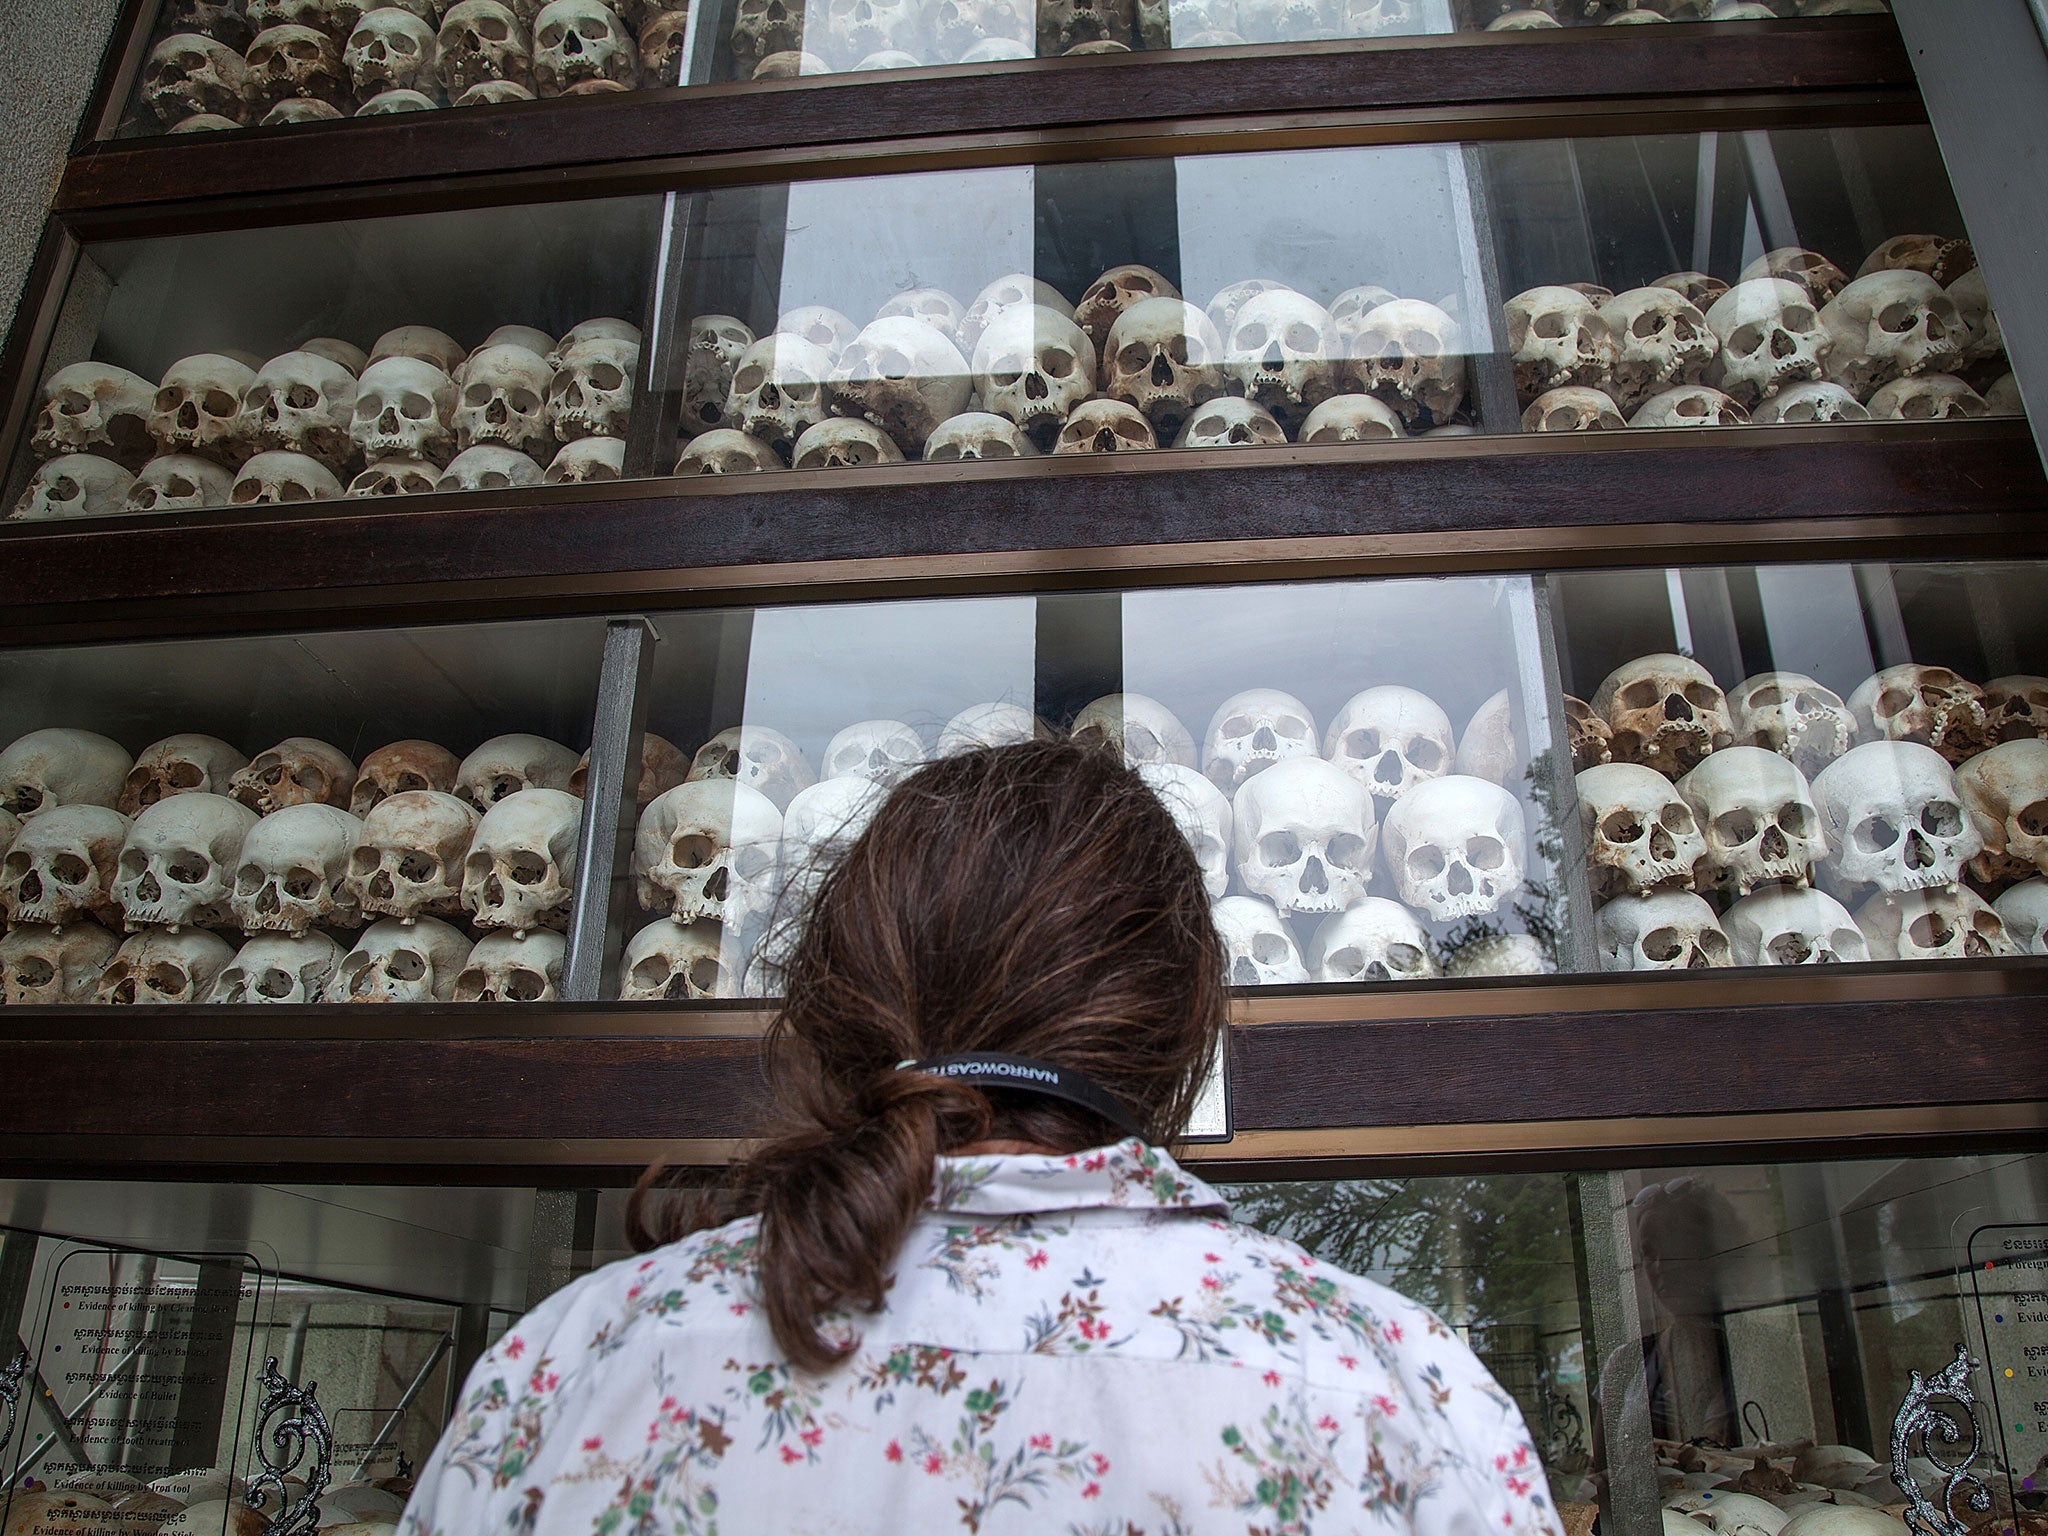 A young Cambodian woman looks at the main stupa in Choeung Ek Killing Fields, which is filled with thousands of skulls of those killed during the Pol Pot regime